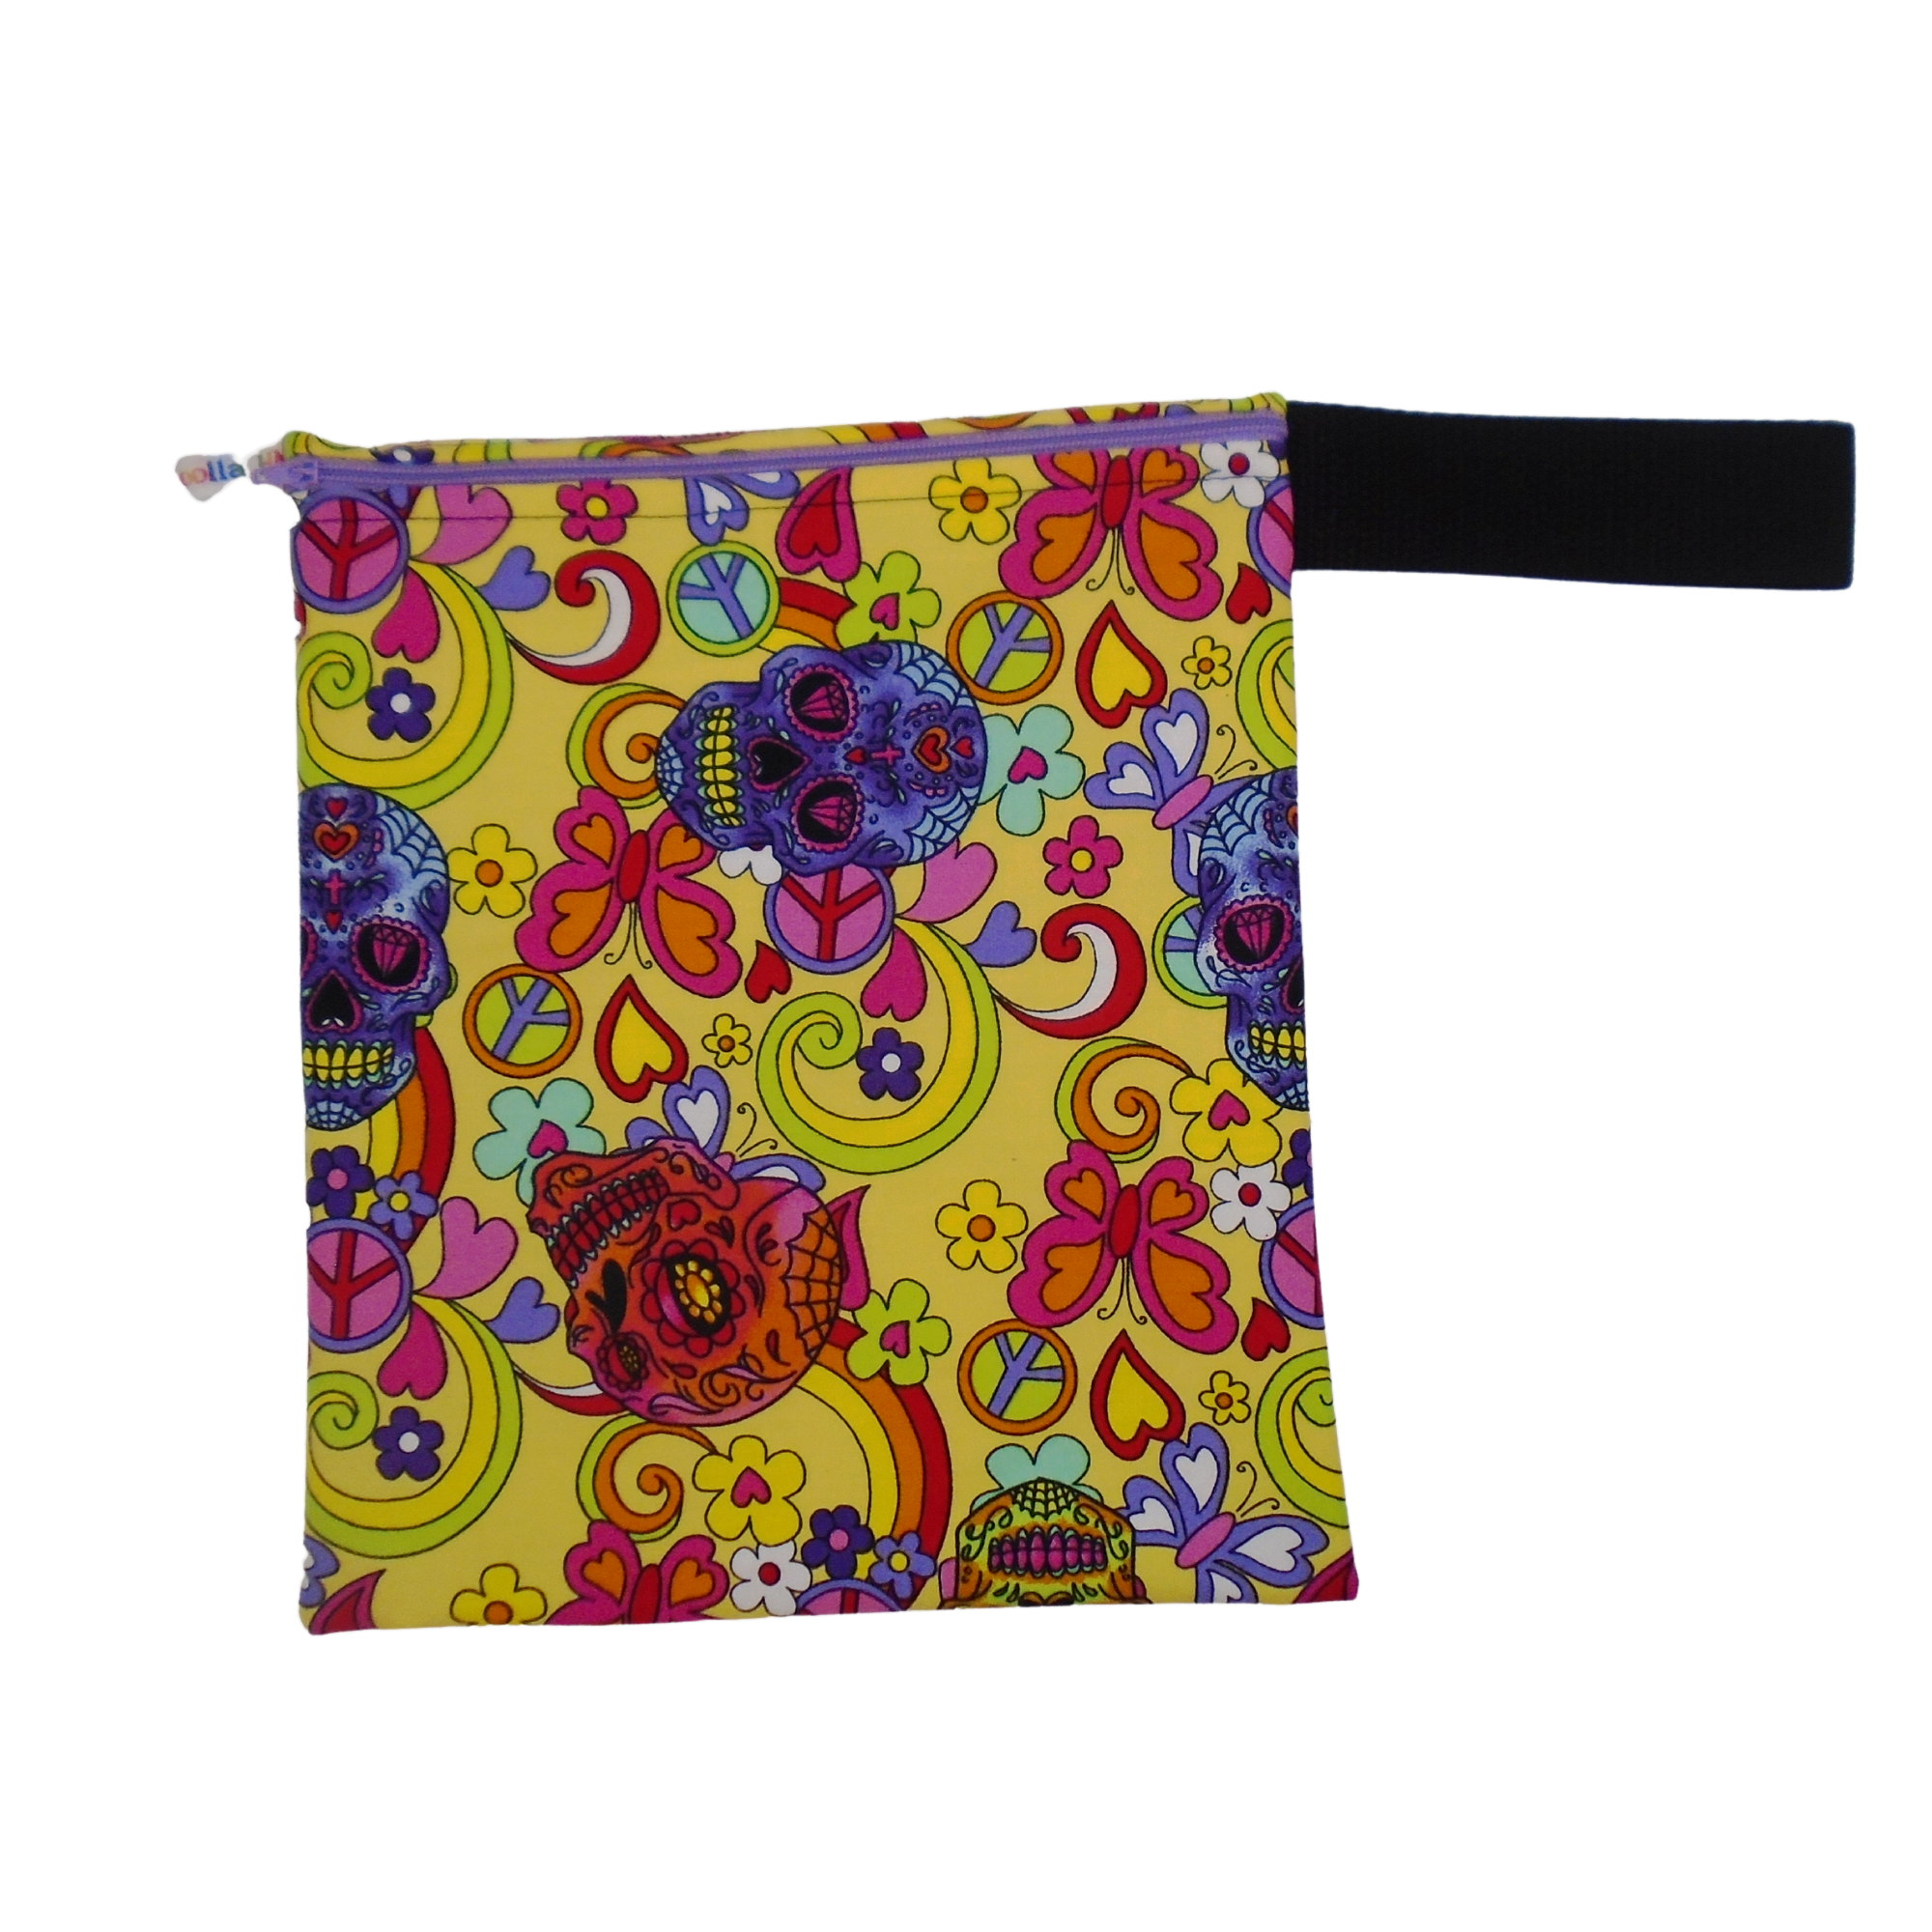 Yellow Sugar Skull -  Handy Poppins Pouch, Waterproof, Washable, Food Safe, Vegan, Lined Zip Bag With Wrist Strap